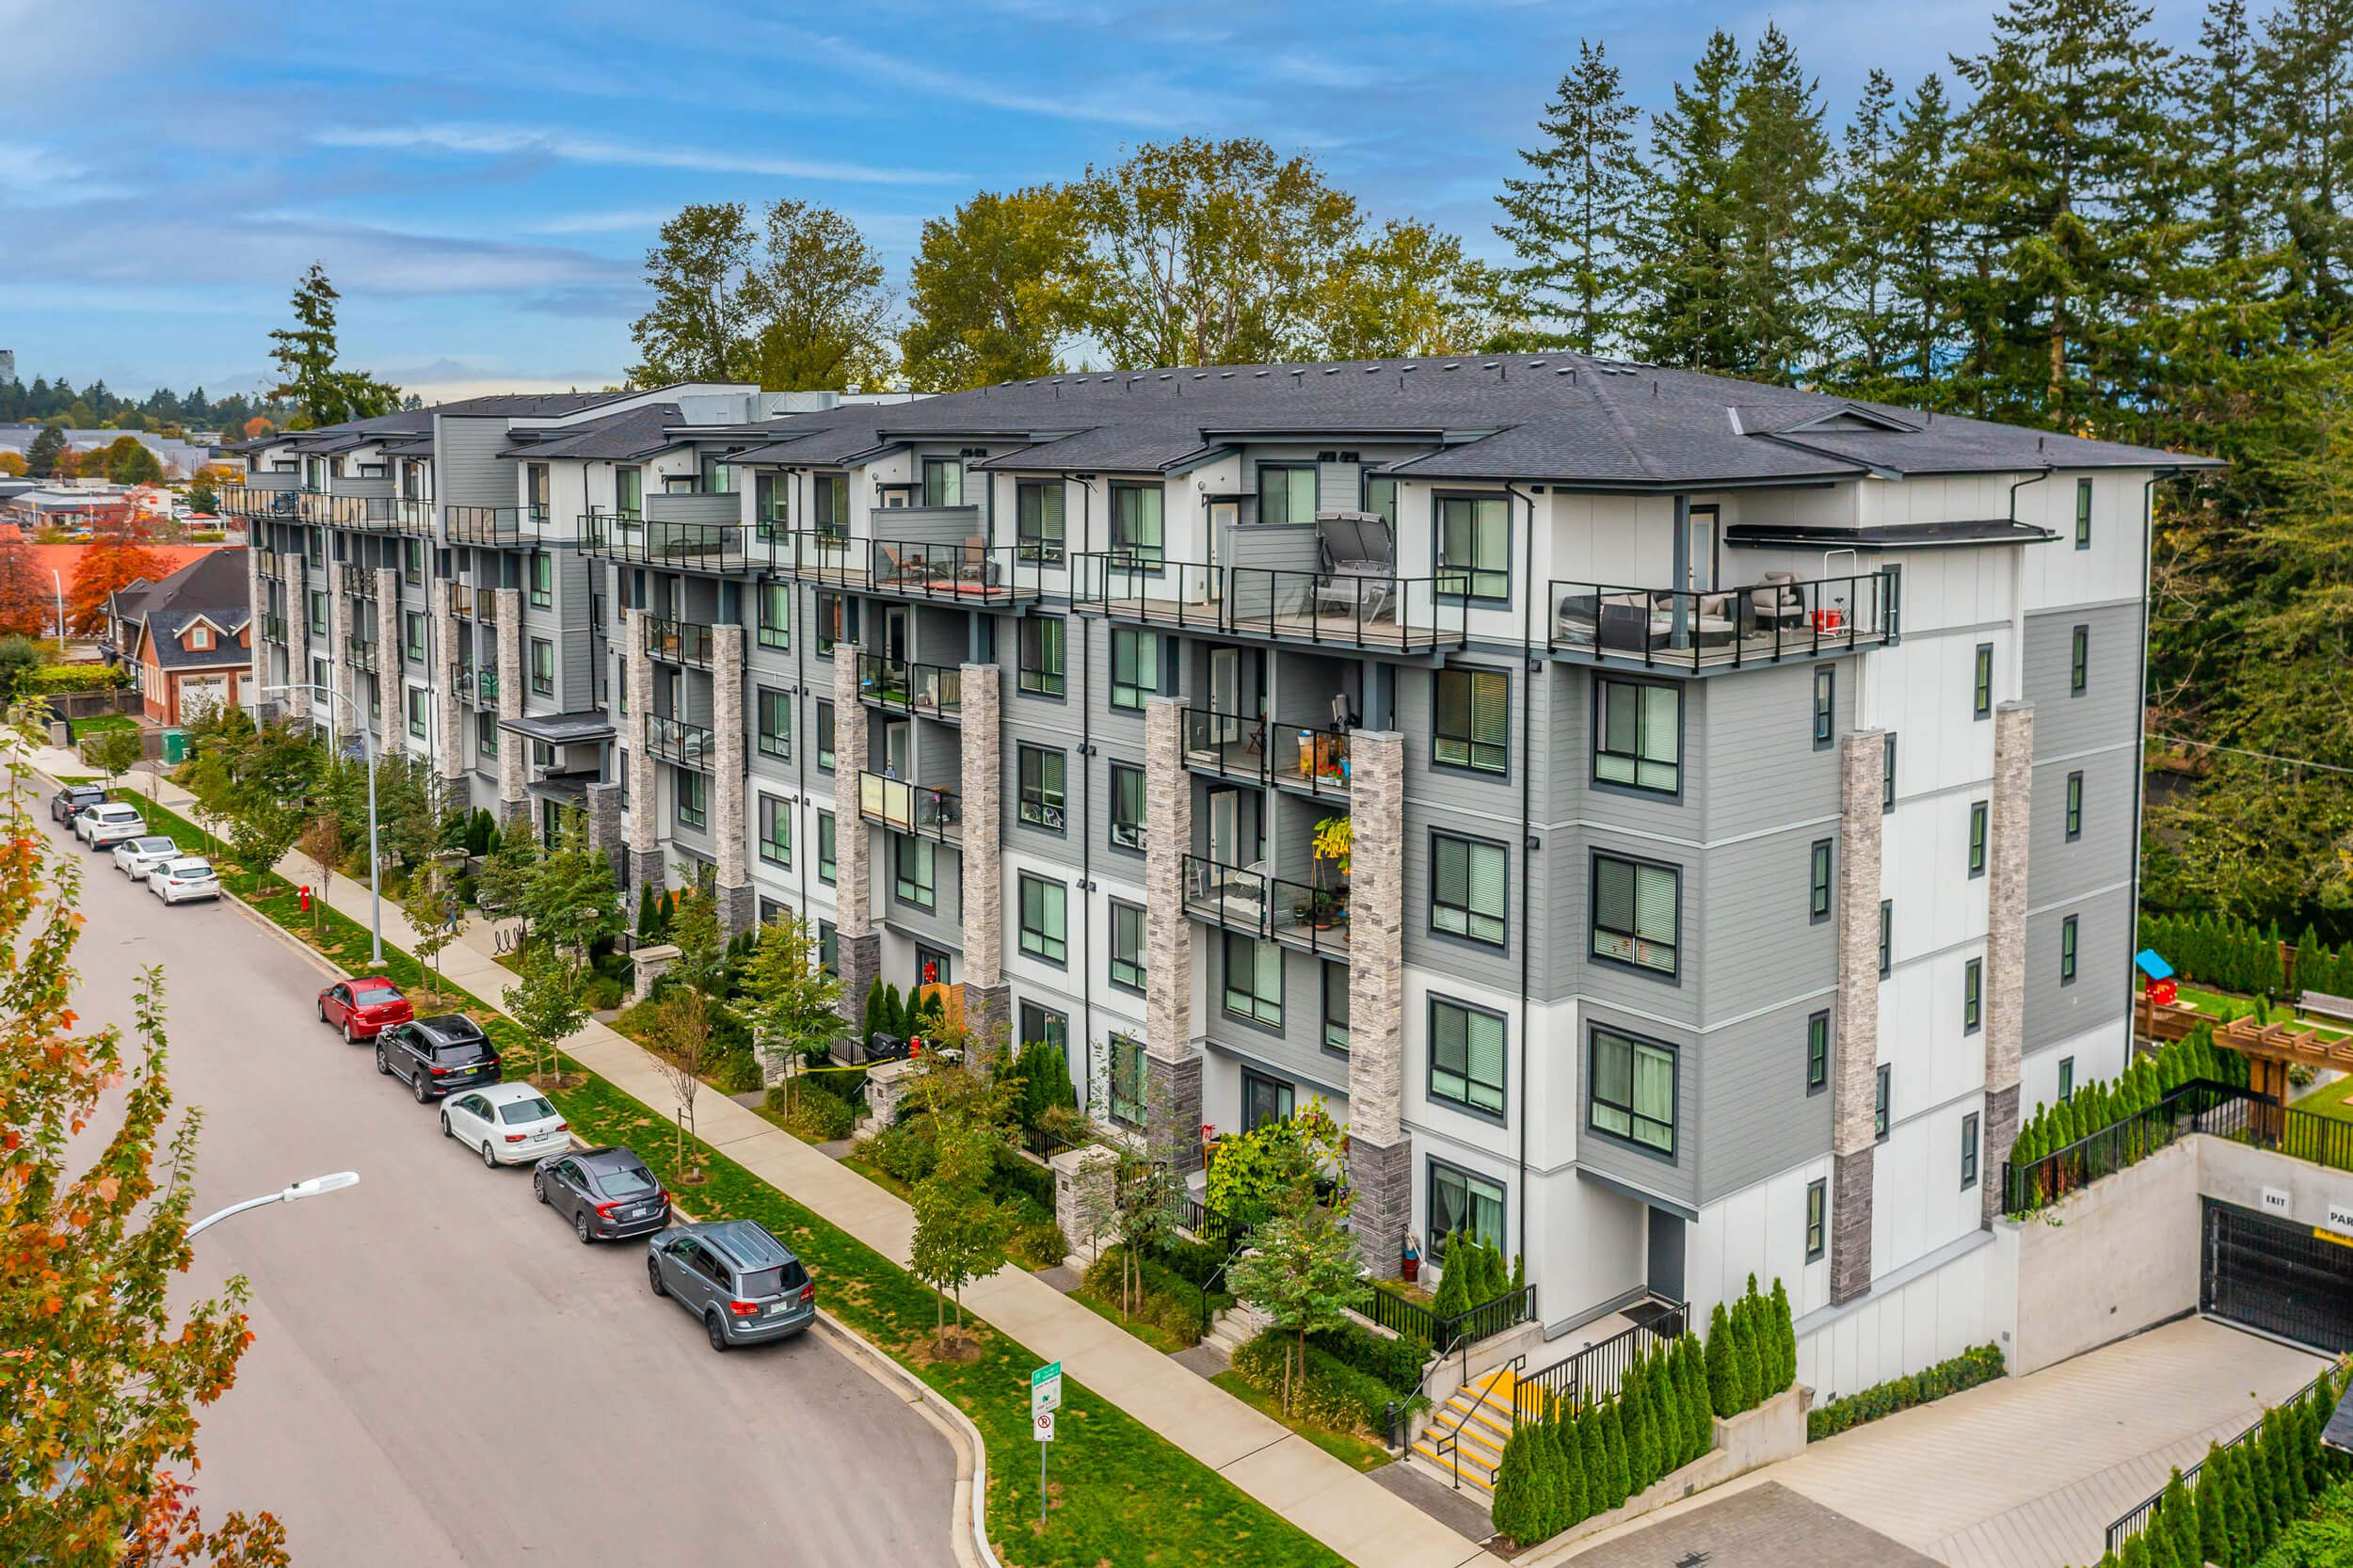 The “The Guildford” development is a condo and townhouse residential project in Surrey. Design by Group 161 | Barnett Dembek Architects.